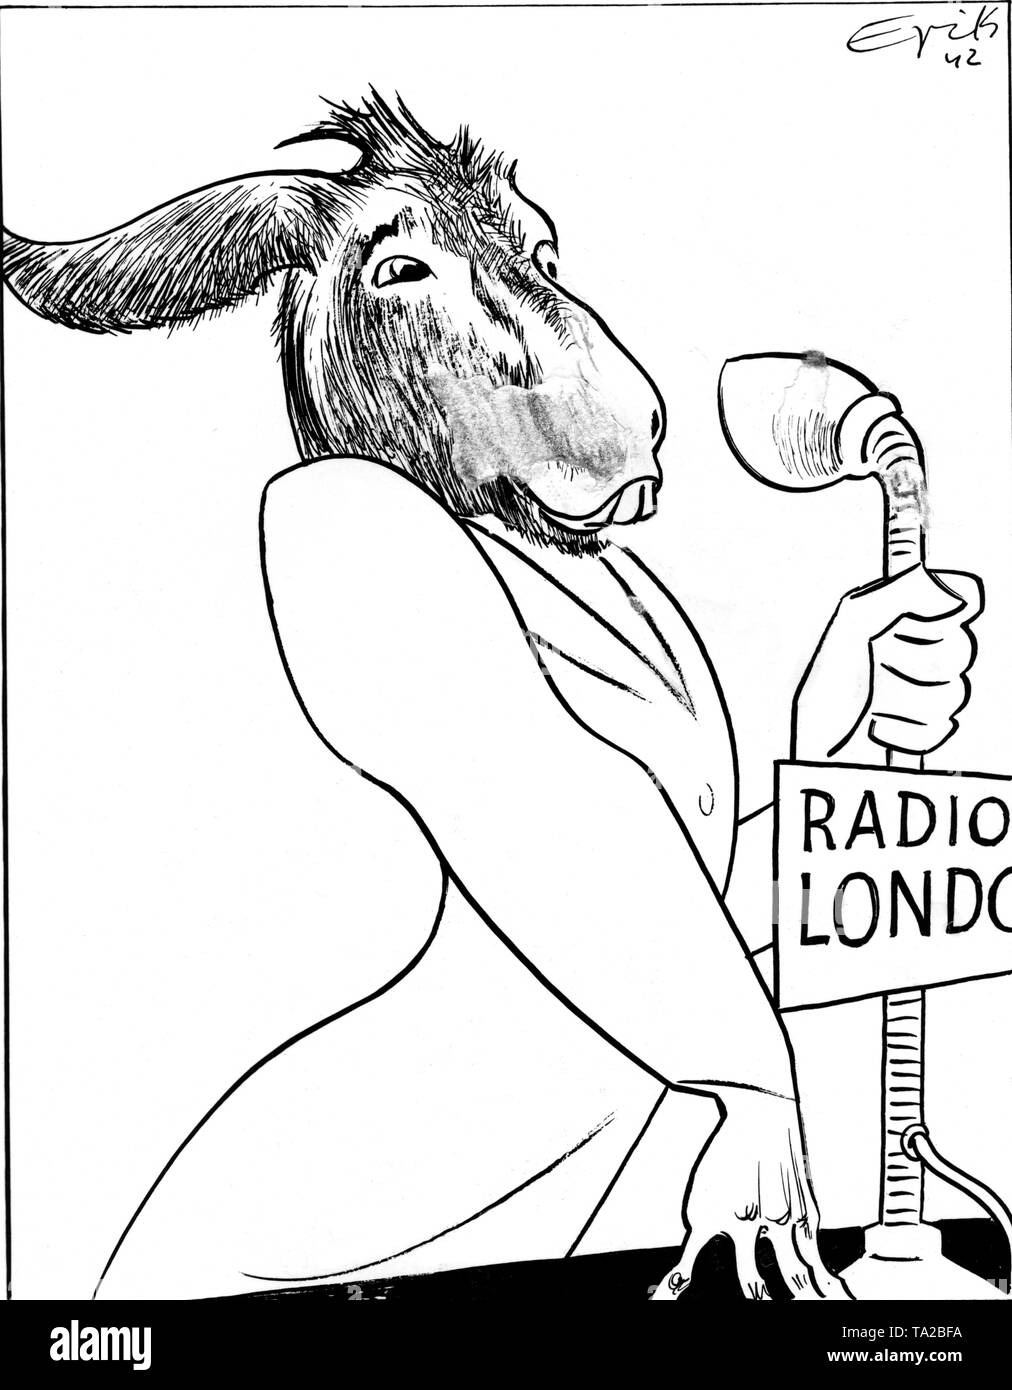 This anti-British propaganda poster shows the British radio host in the form of a donkey with reference to British press release on the losses of submarines in the Atlantic. Drawing: Erik Stock Photo